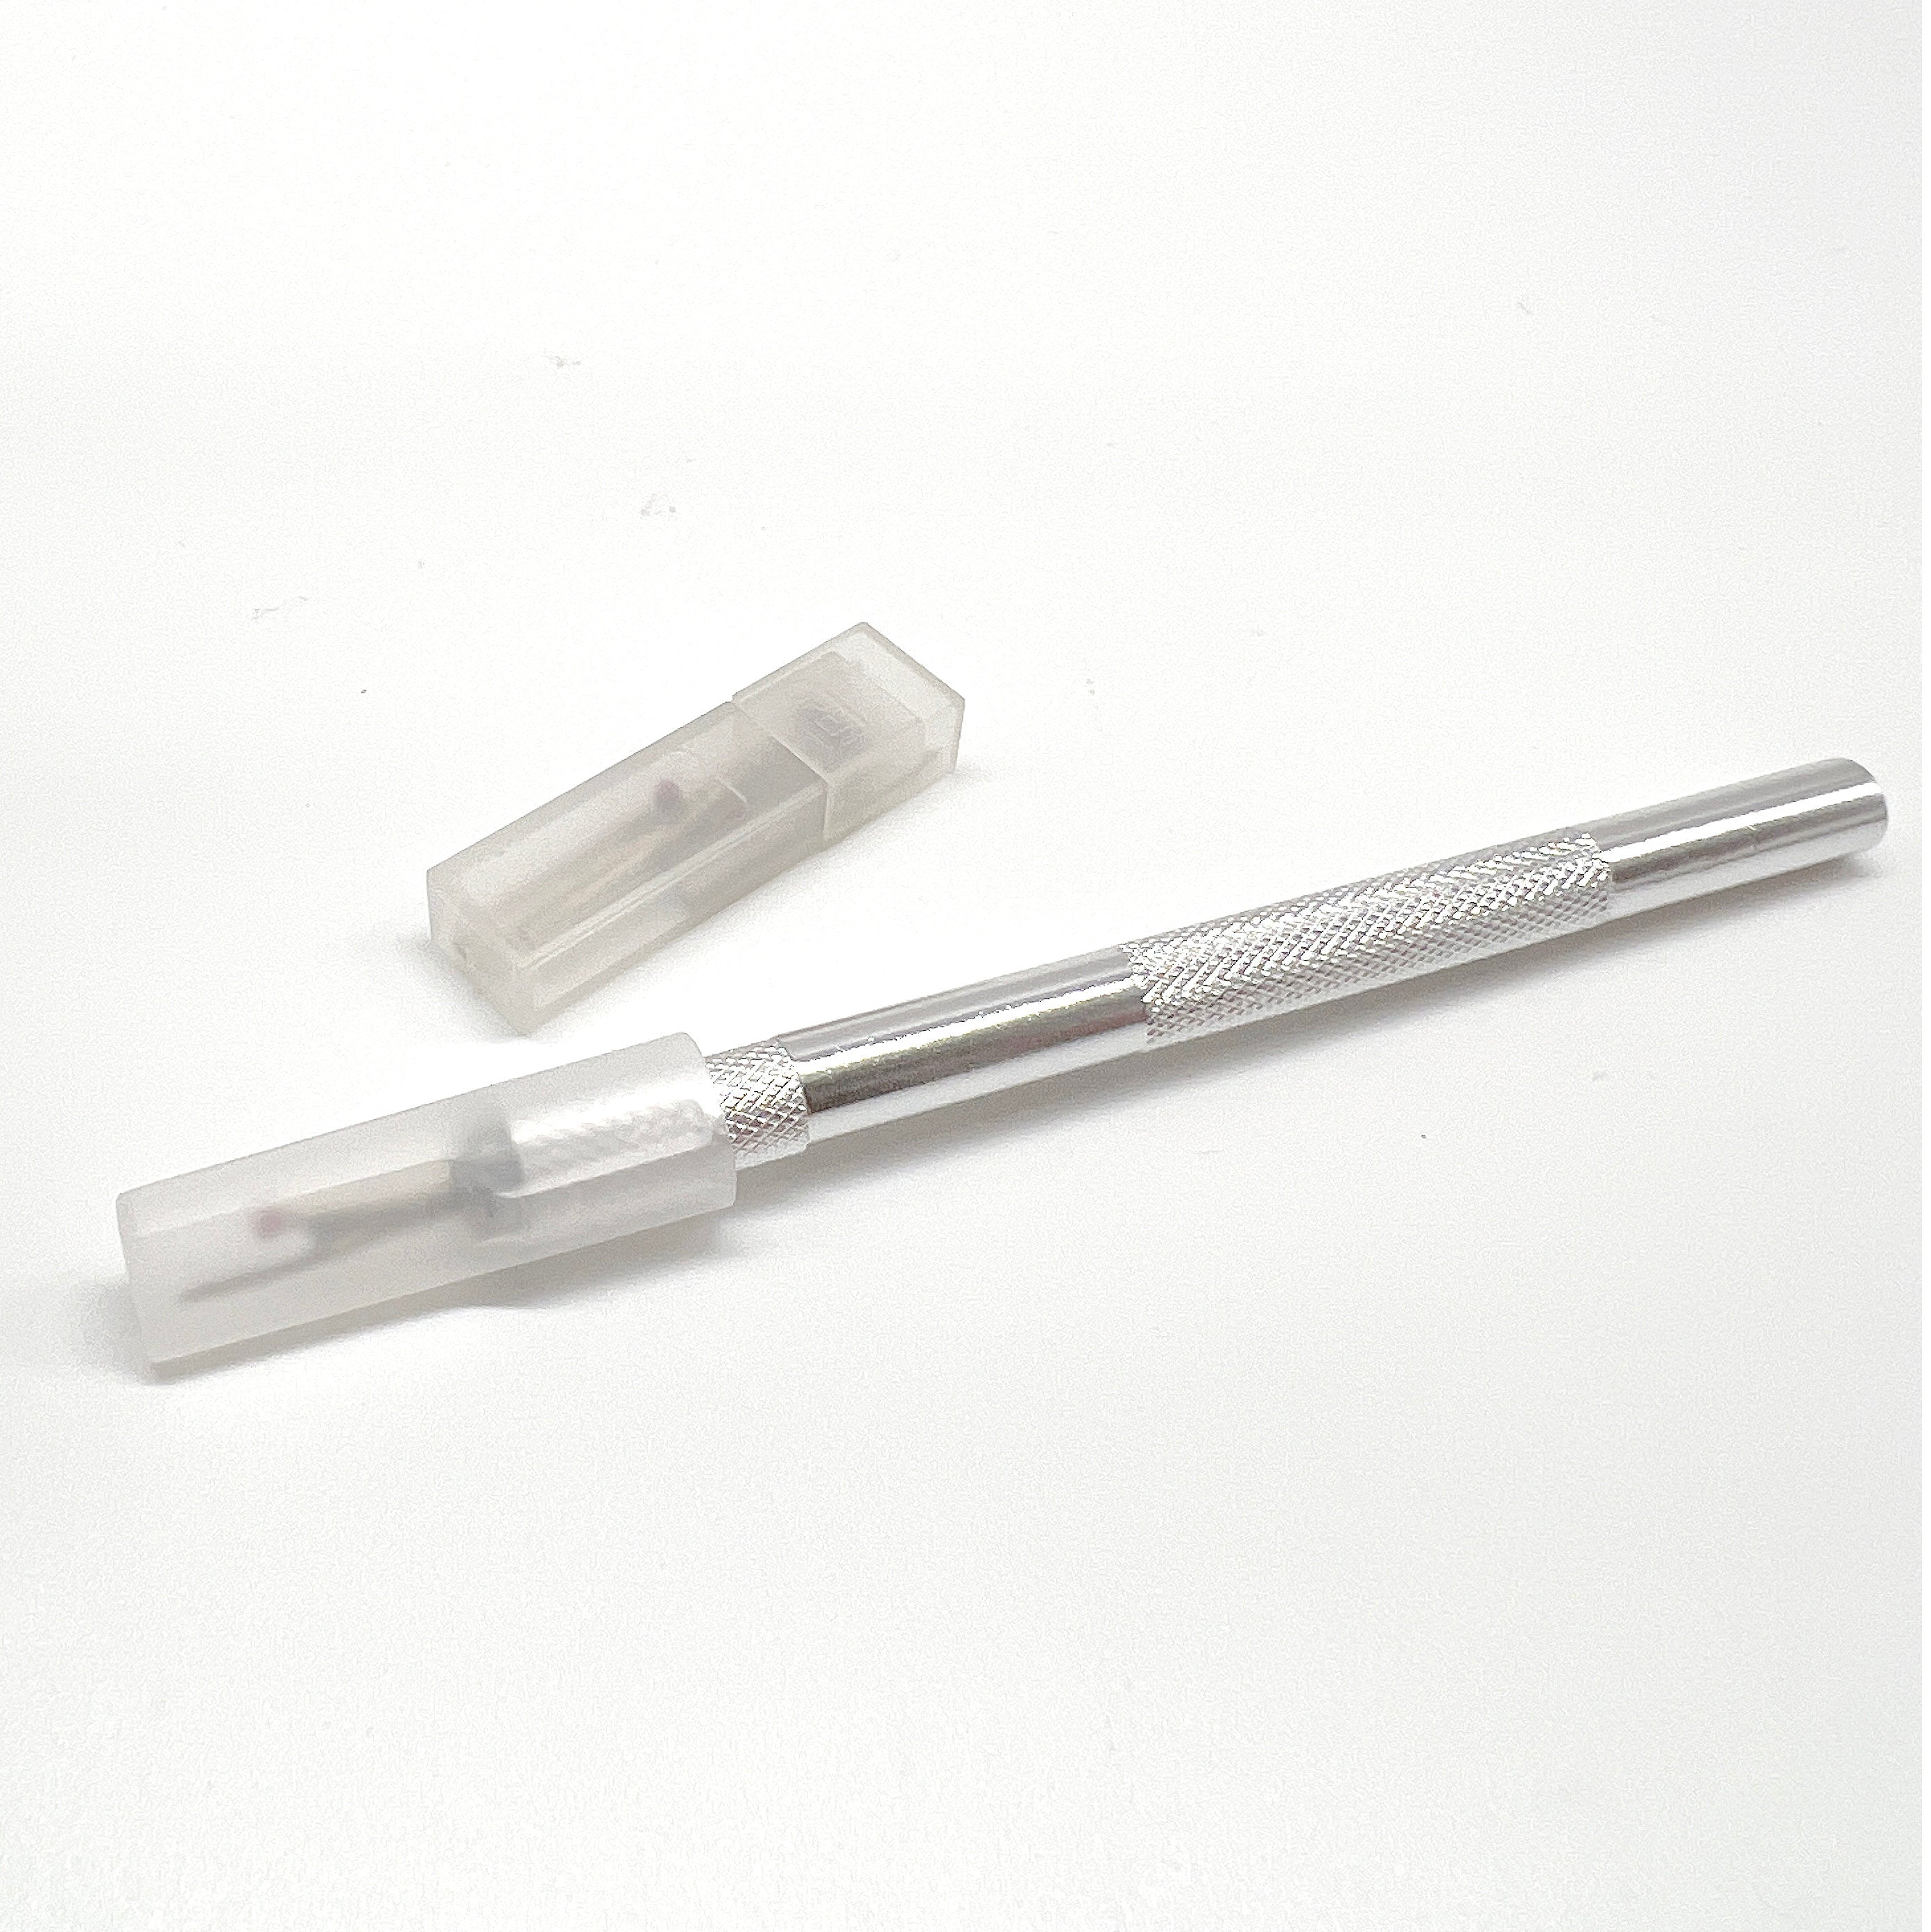 Precision Metal Seam Ripper Thread Cutters with Extra Tips in 2 Colors - Stitch Love Studio